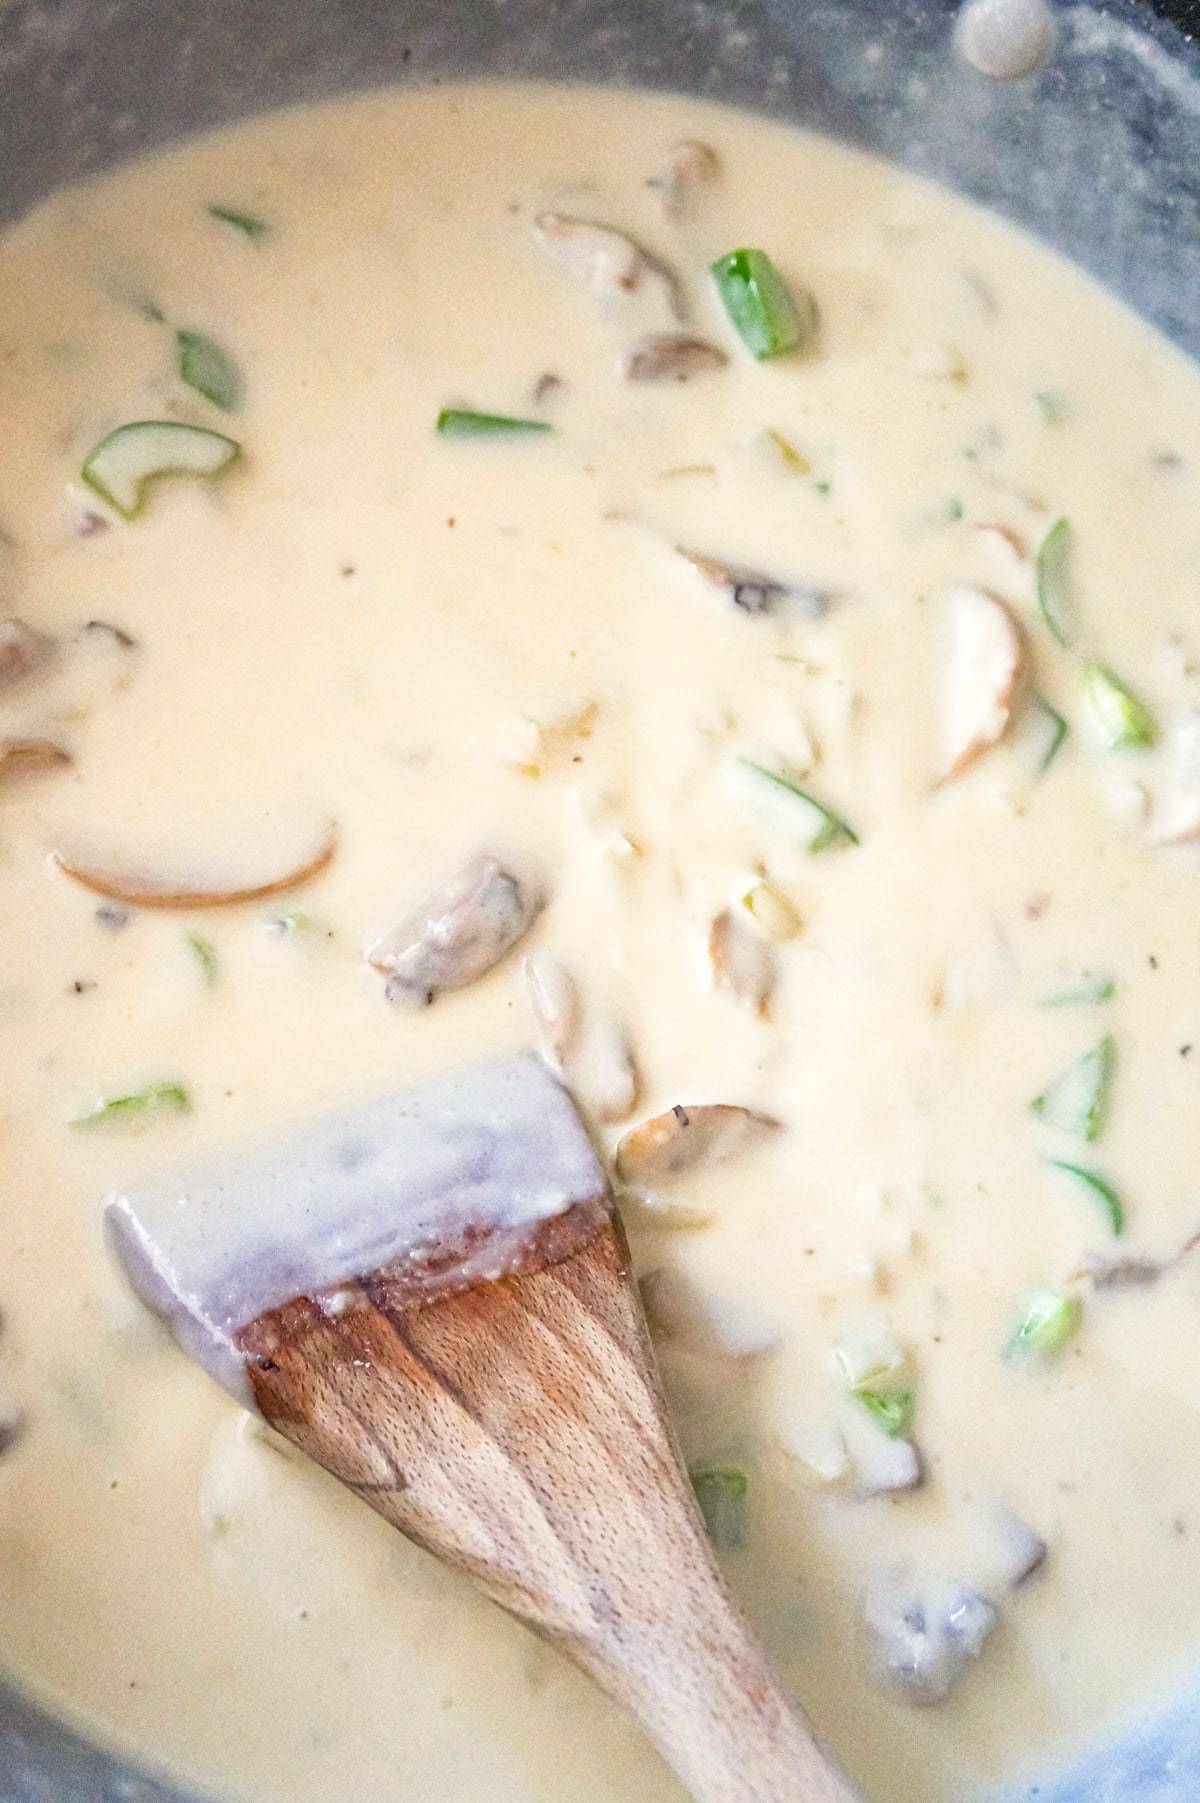 creamy sauce with sliced mushrooms and diced green peppers